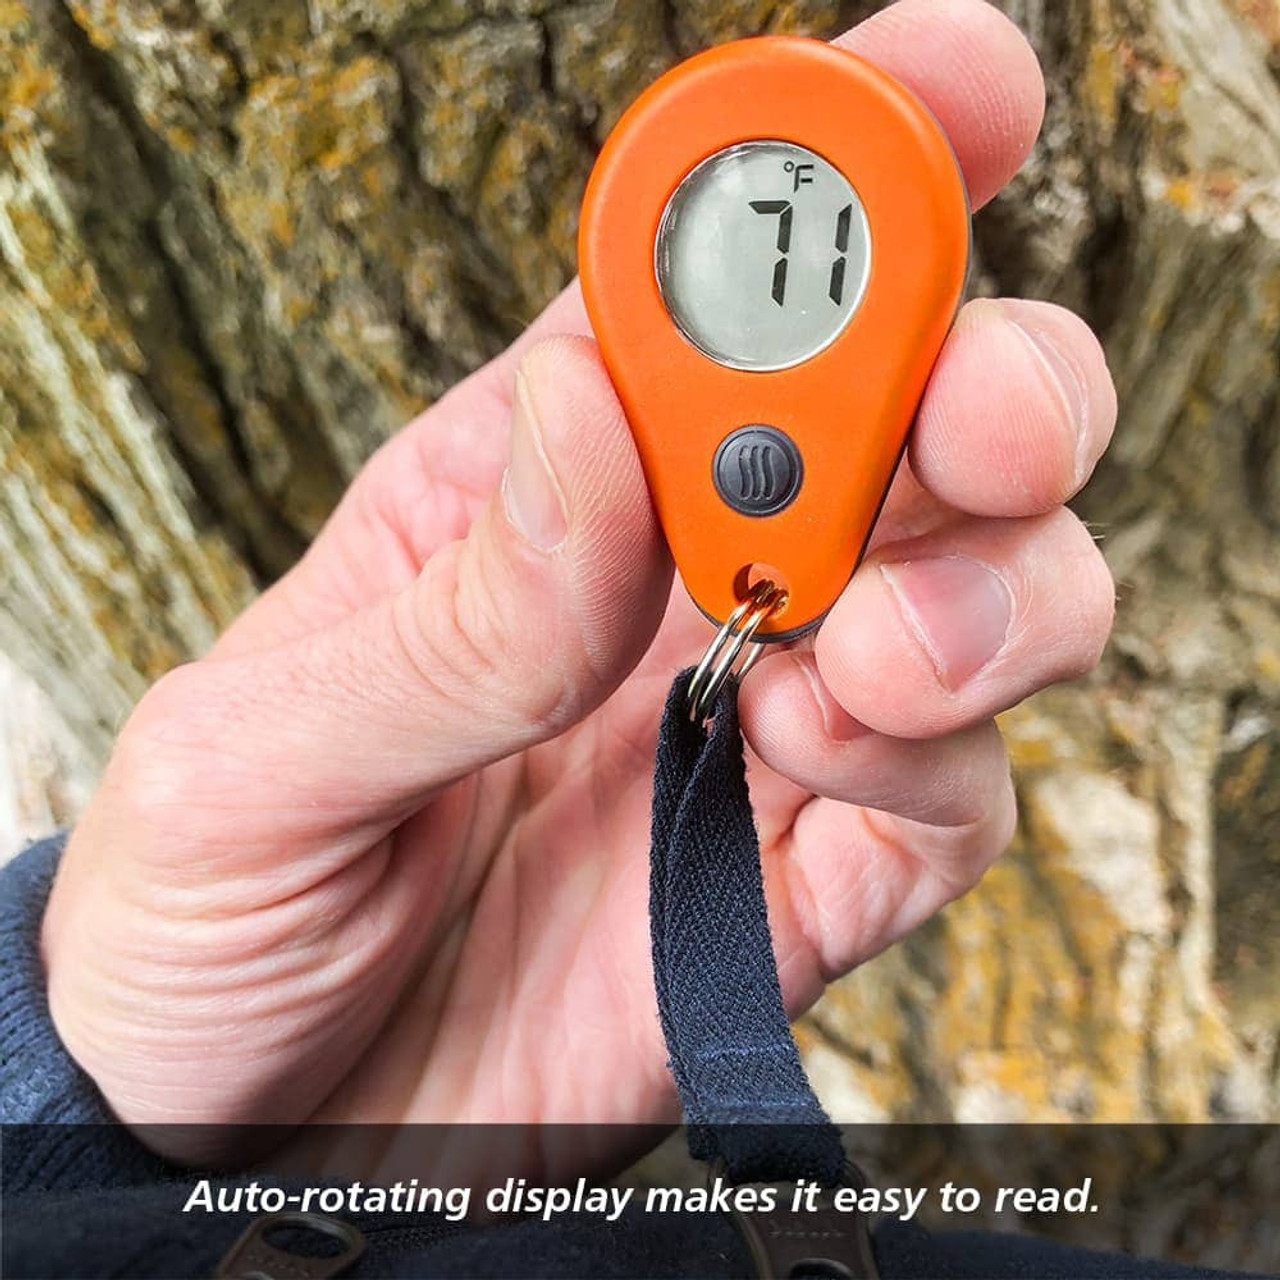 ThermoDrop Zipper-Pull Thermometer - Why is it so popular? 